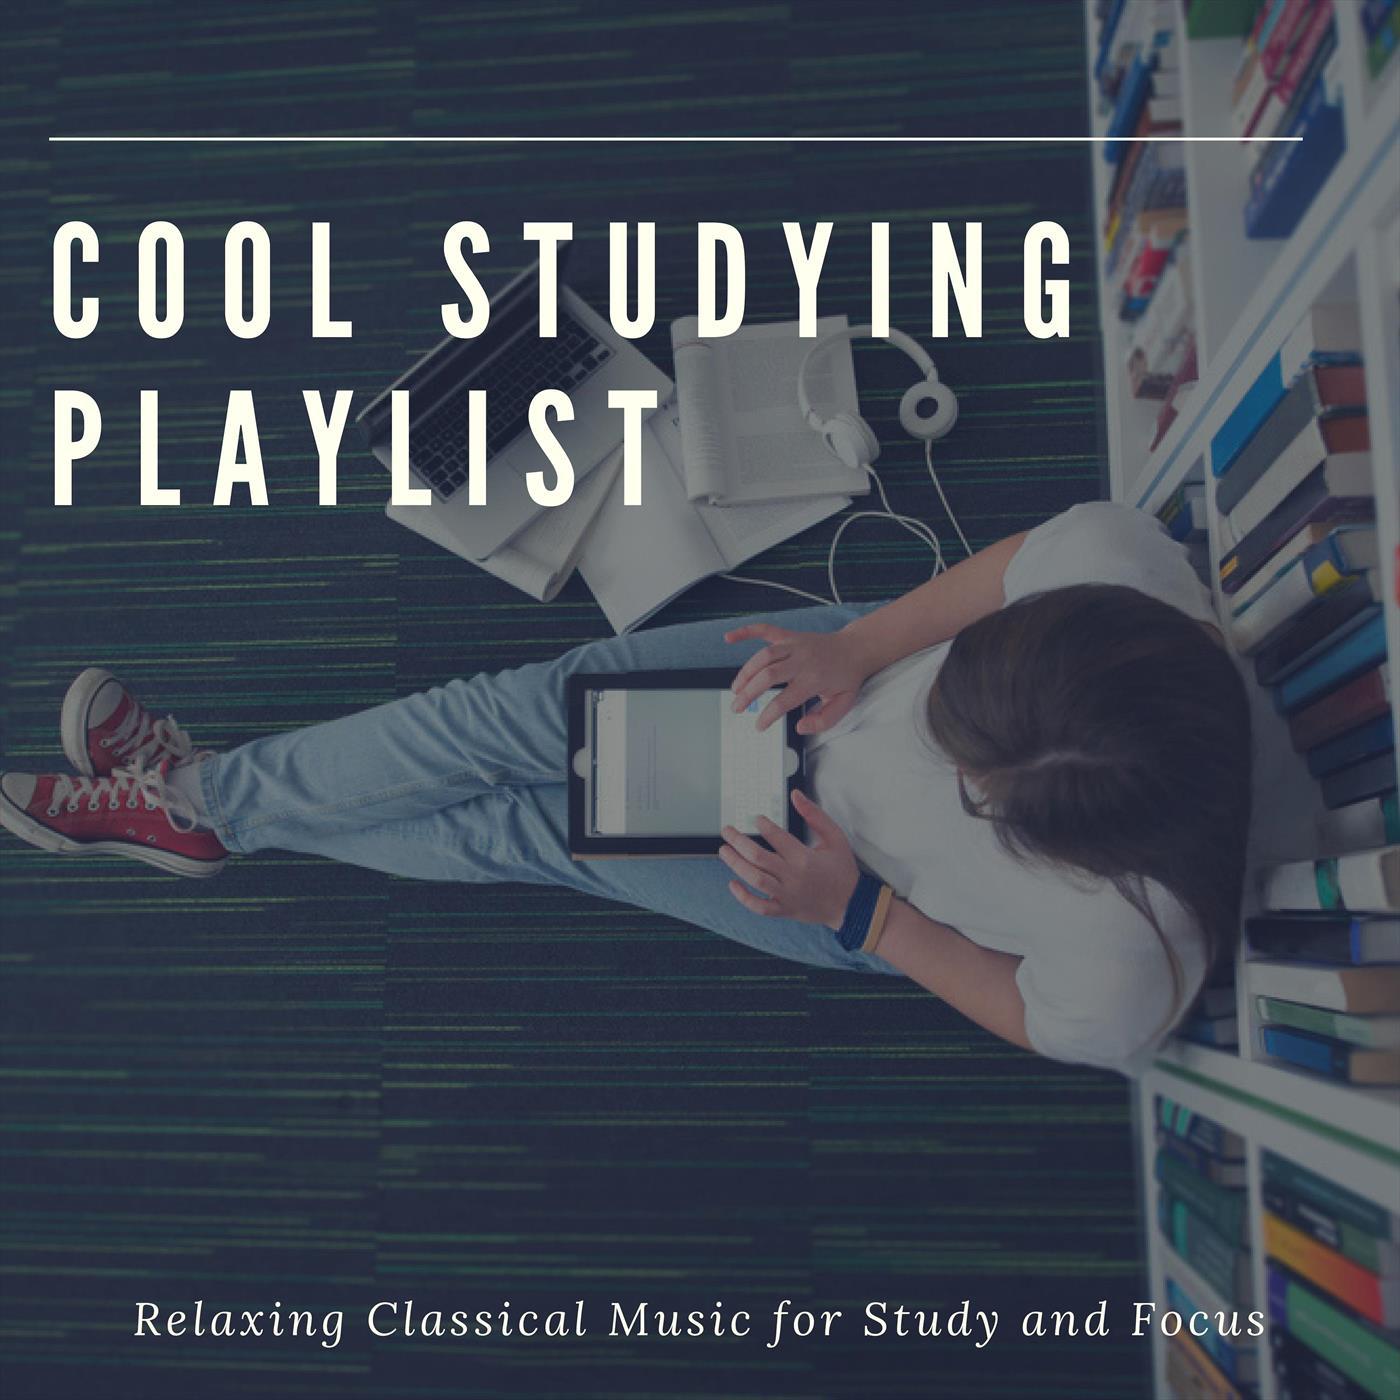 Cool Studying Playlist: Relaxing Classical Music for Study and Focus